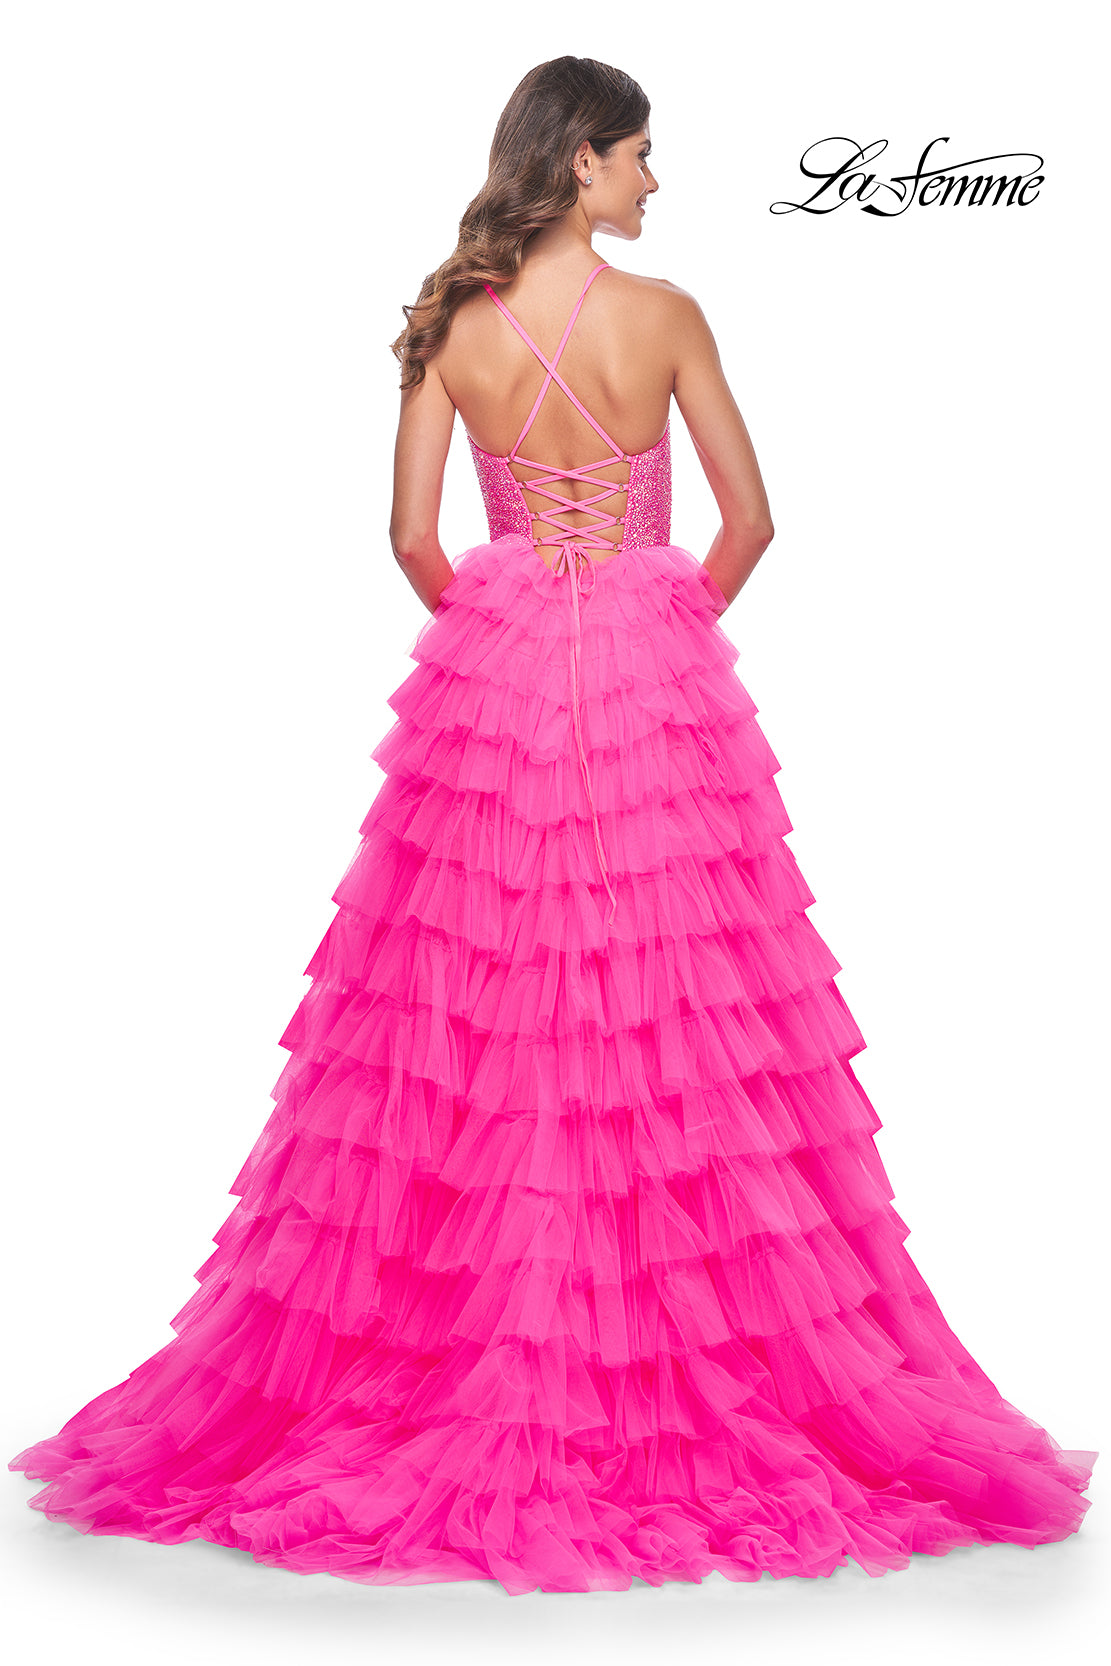 La-Femme-32335-Sweetheart-Neckline-Lace-up-Back-High-Slit-Hot-Stone-Tulle-Ball-Gowns-NeonPink-Evening-Dress-B-Chic-Fashions-Prom-Dress